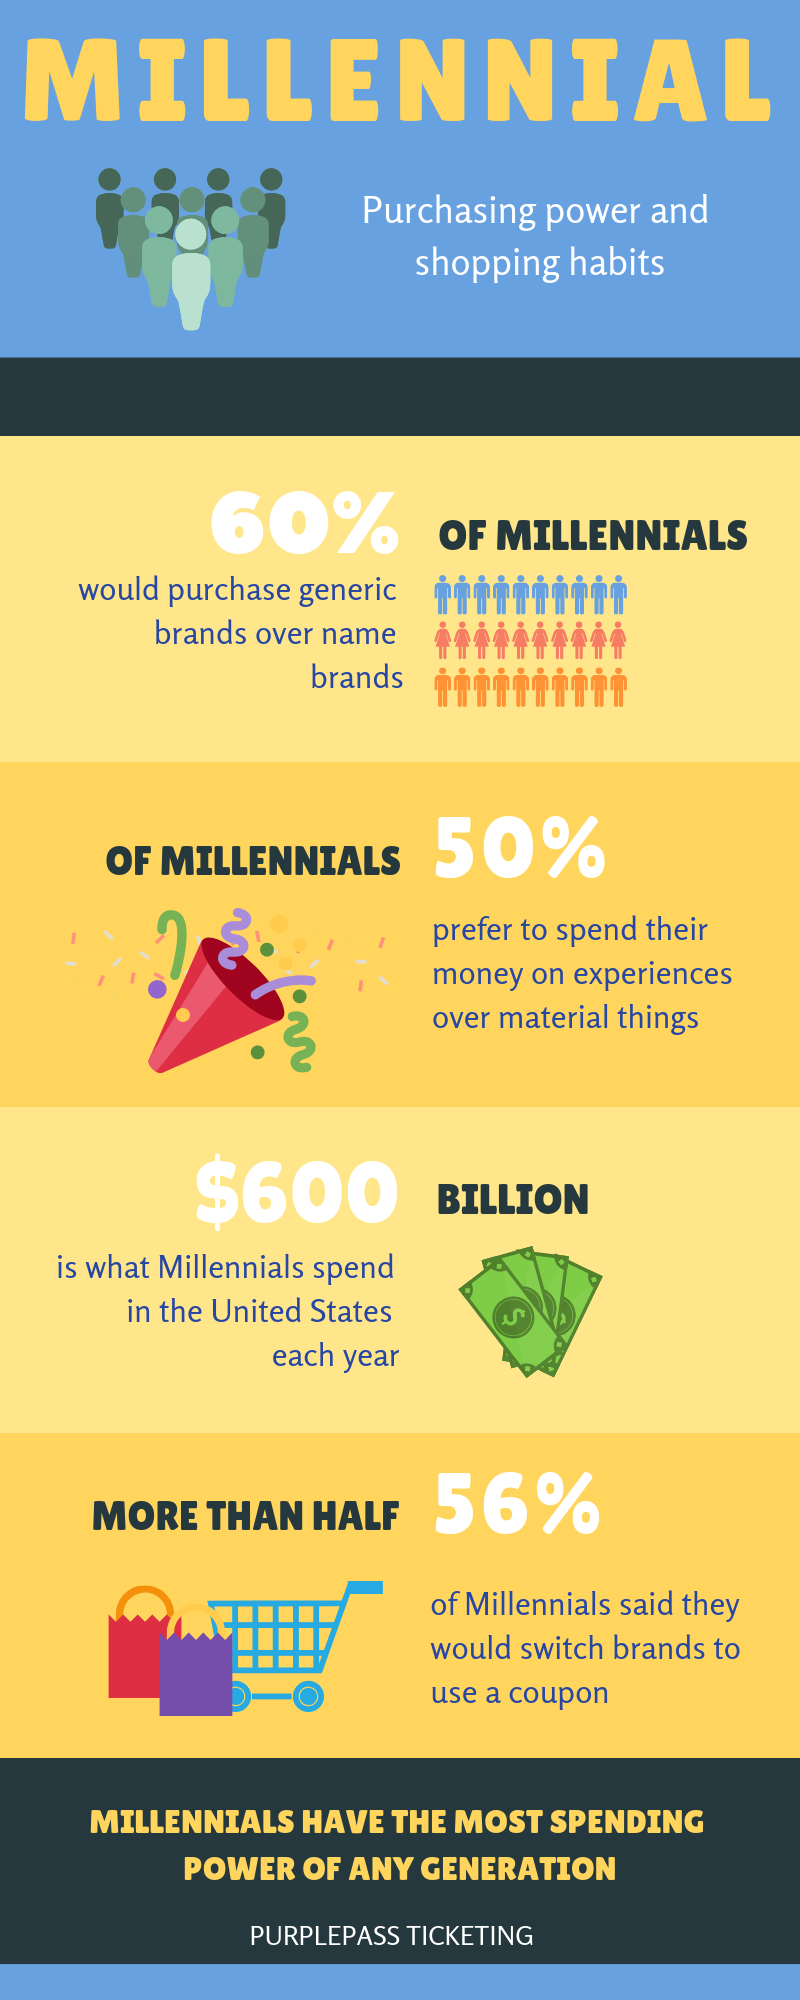 millennial purchasing power and shopping habits